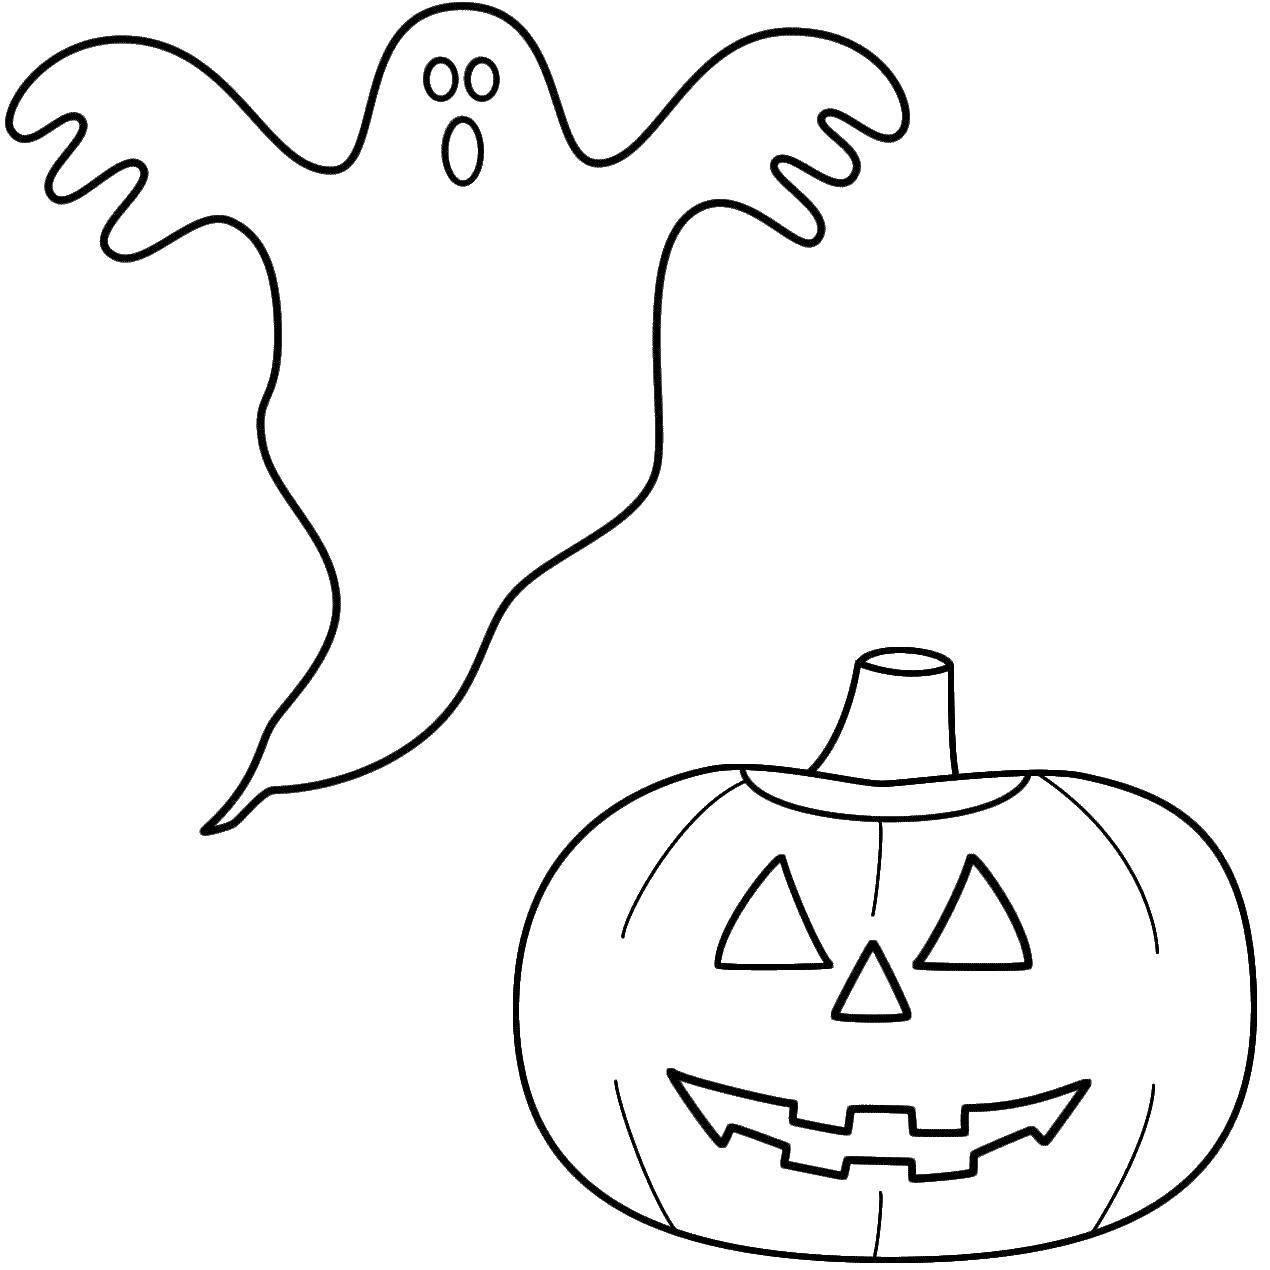 Coloring A Ghost on Halloween. Category Halloween. Tags:  Halloween, Ghost, pumpkin.